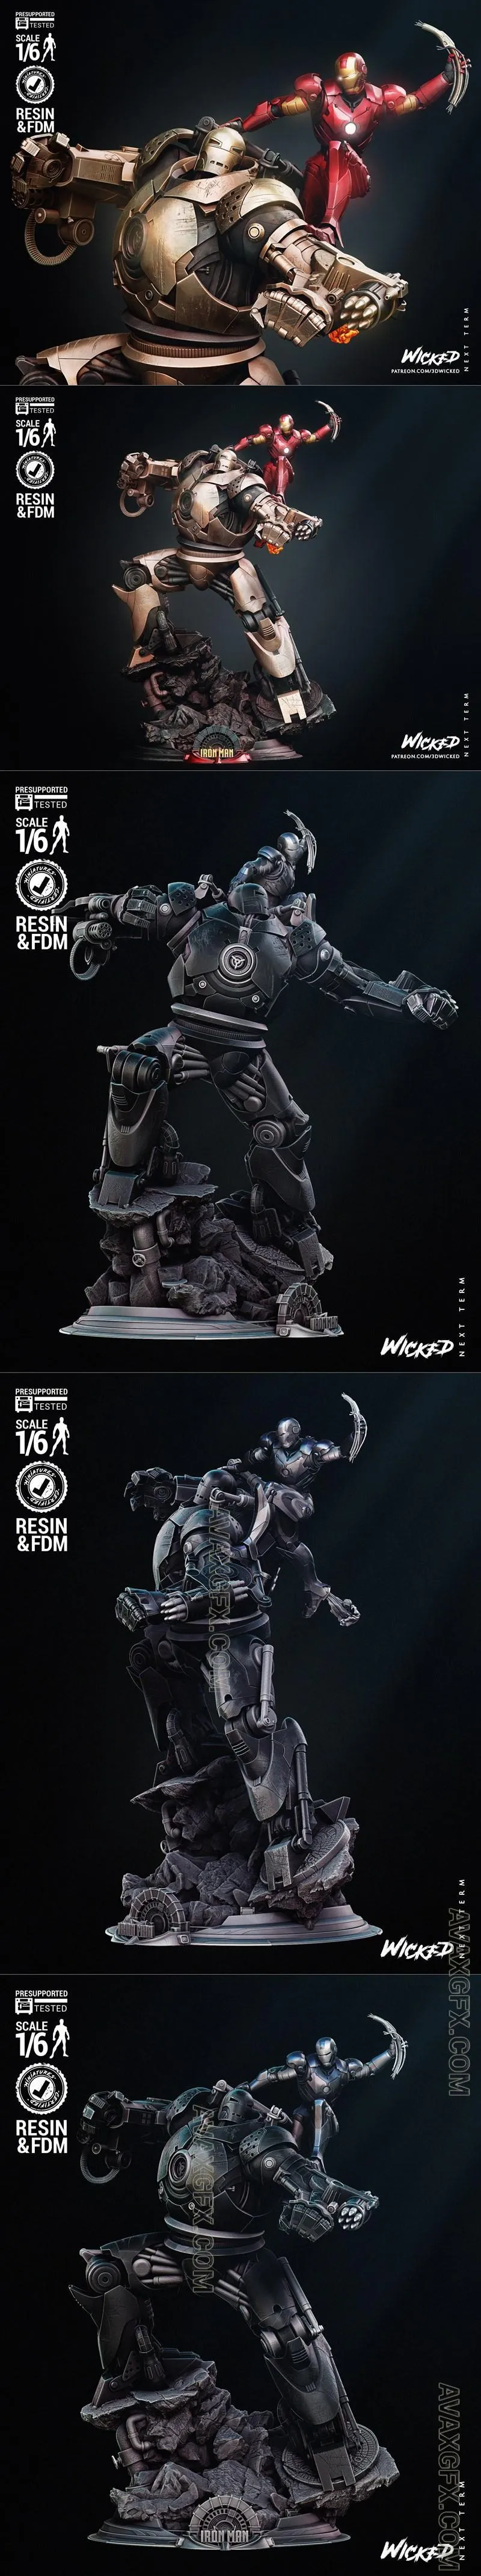 WICKED - Iron Man and Iron Monger Diorama - STL 3D Model